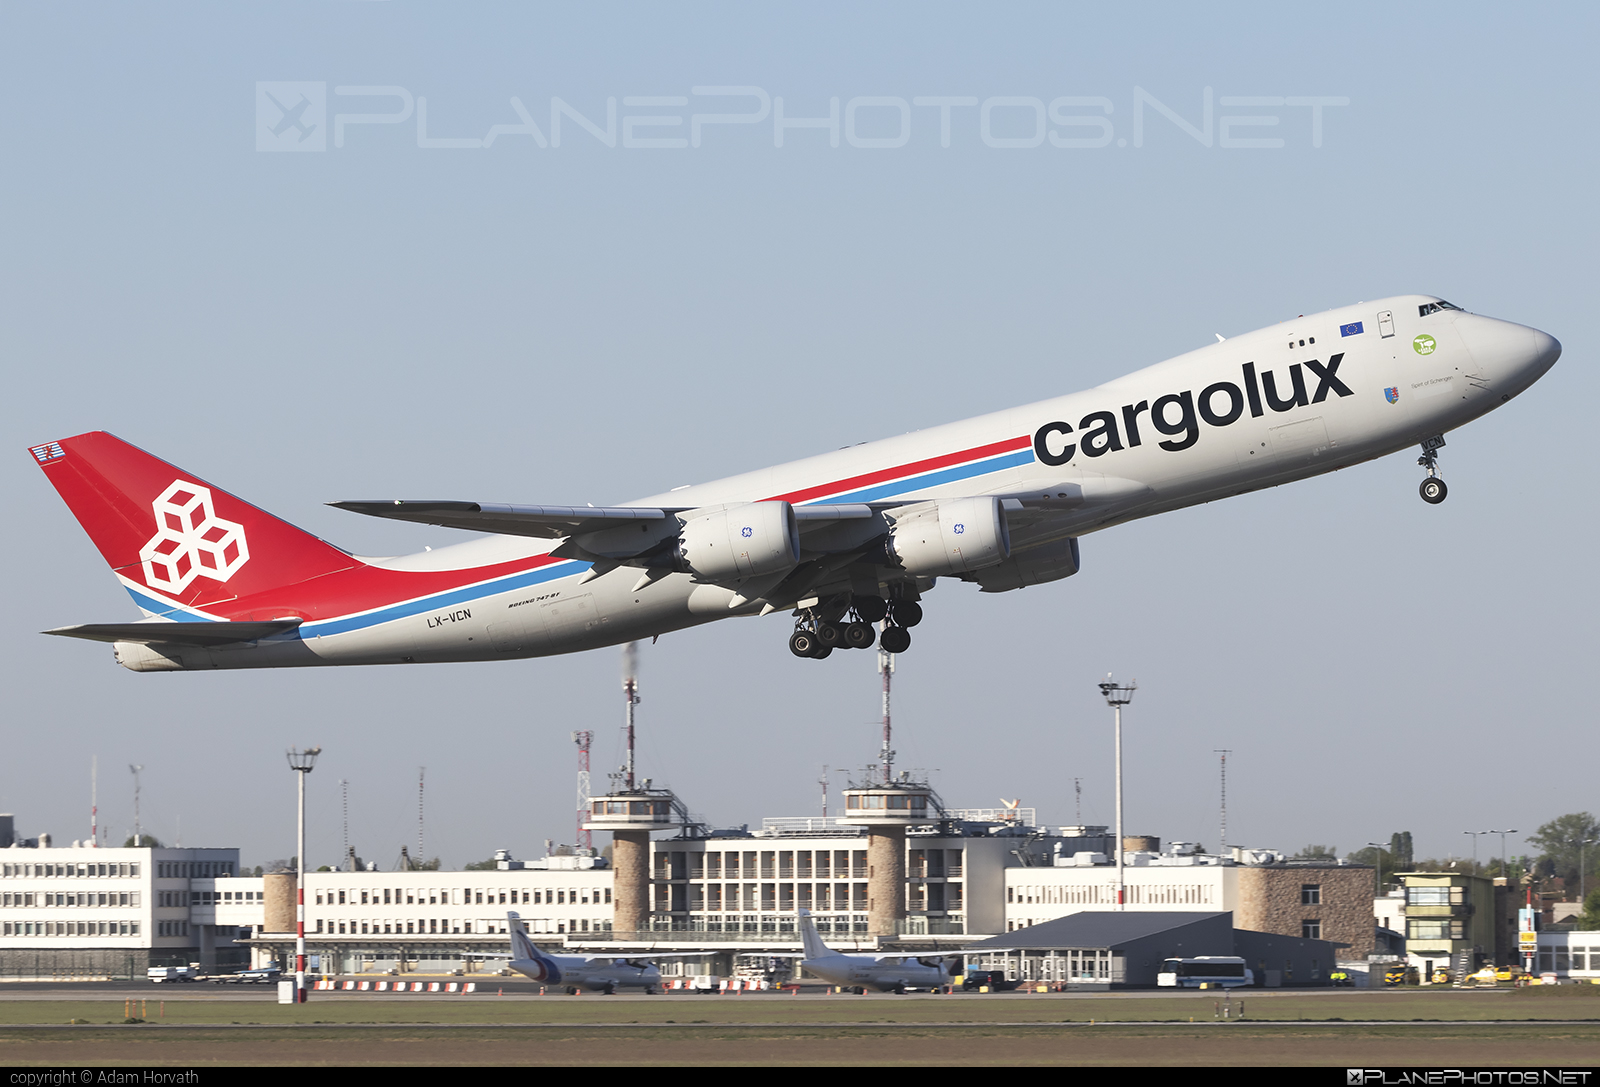 Boeing 747-8F - LX-VCN operated by Cargolux Airlines International #b747 #b747f #b747freighter #boeing #boeing747 #cargolux #jumbo